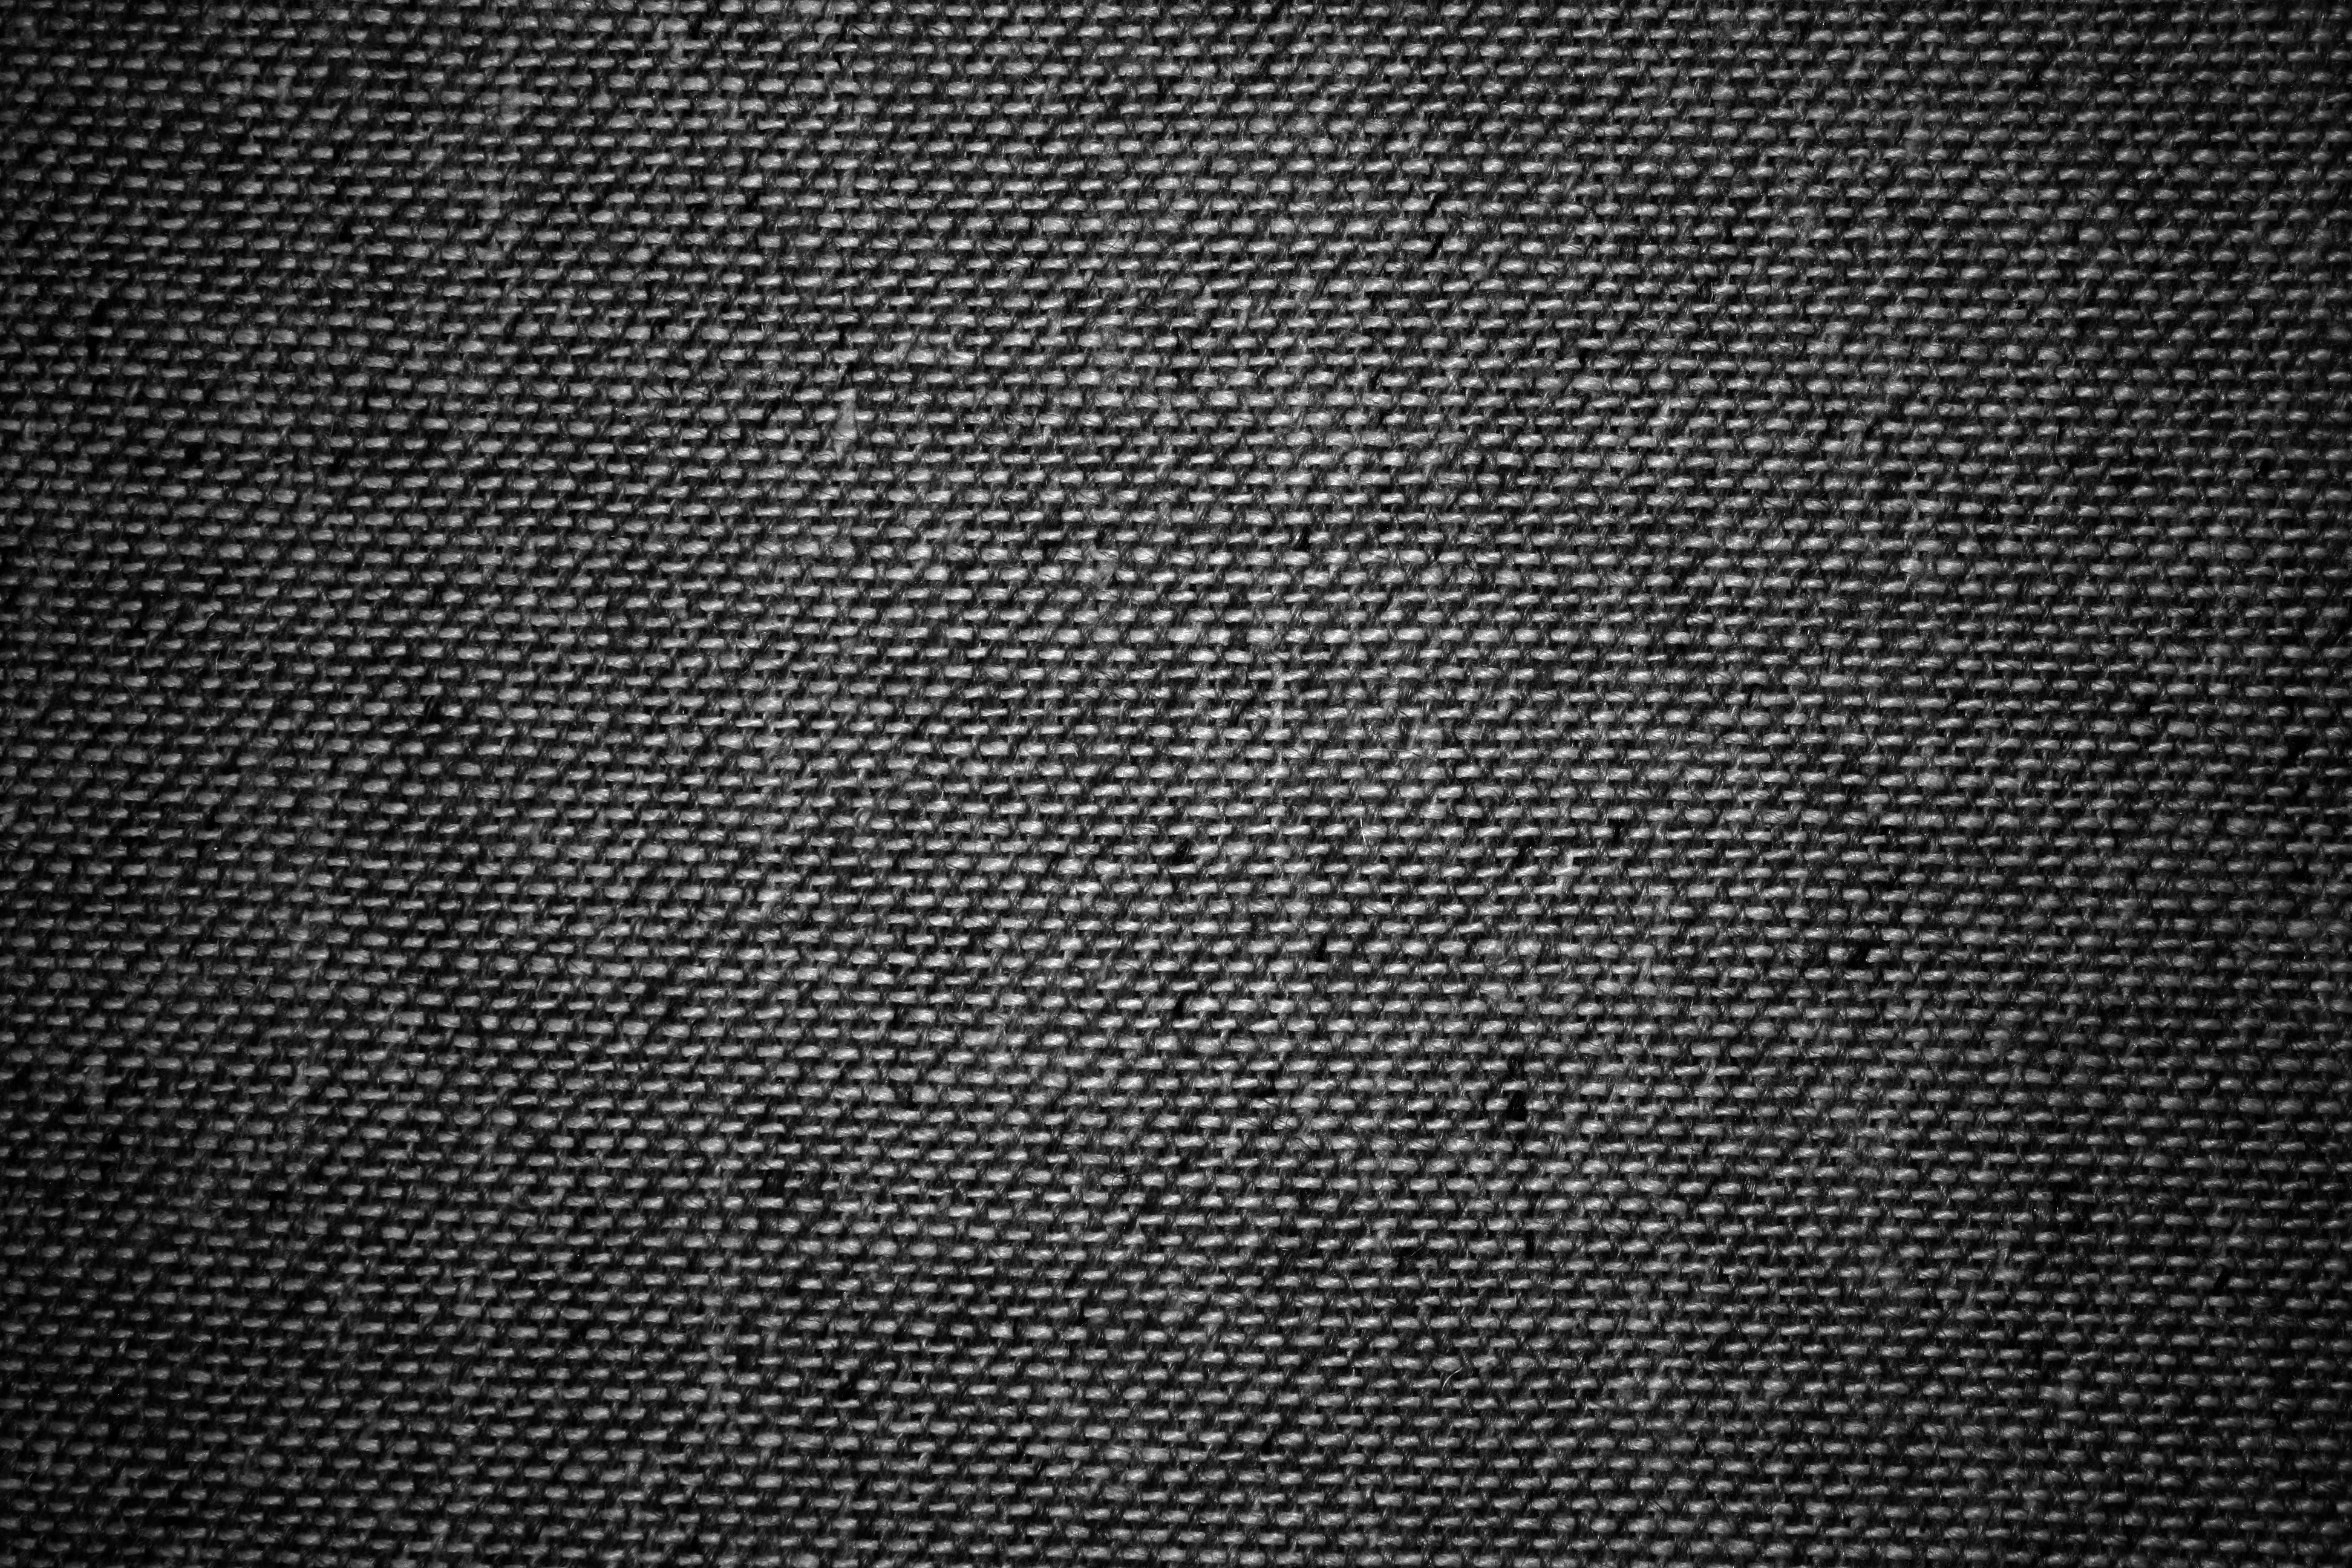 Black And White Upholstery Fabric Close Up Texture